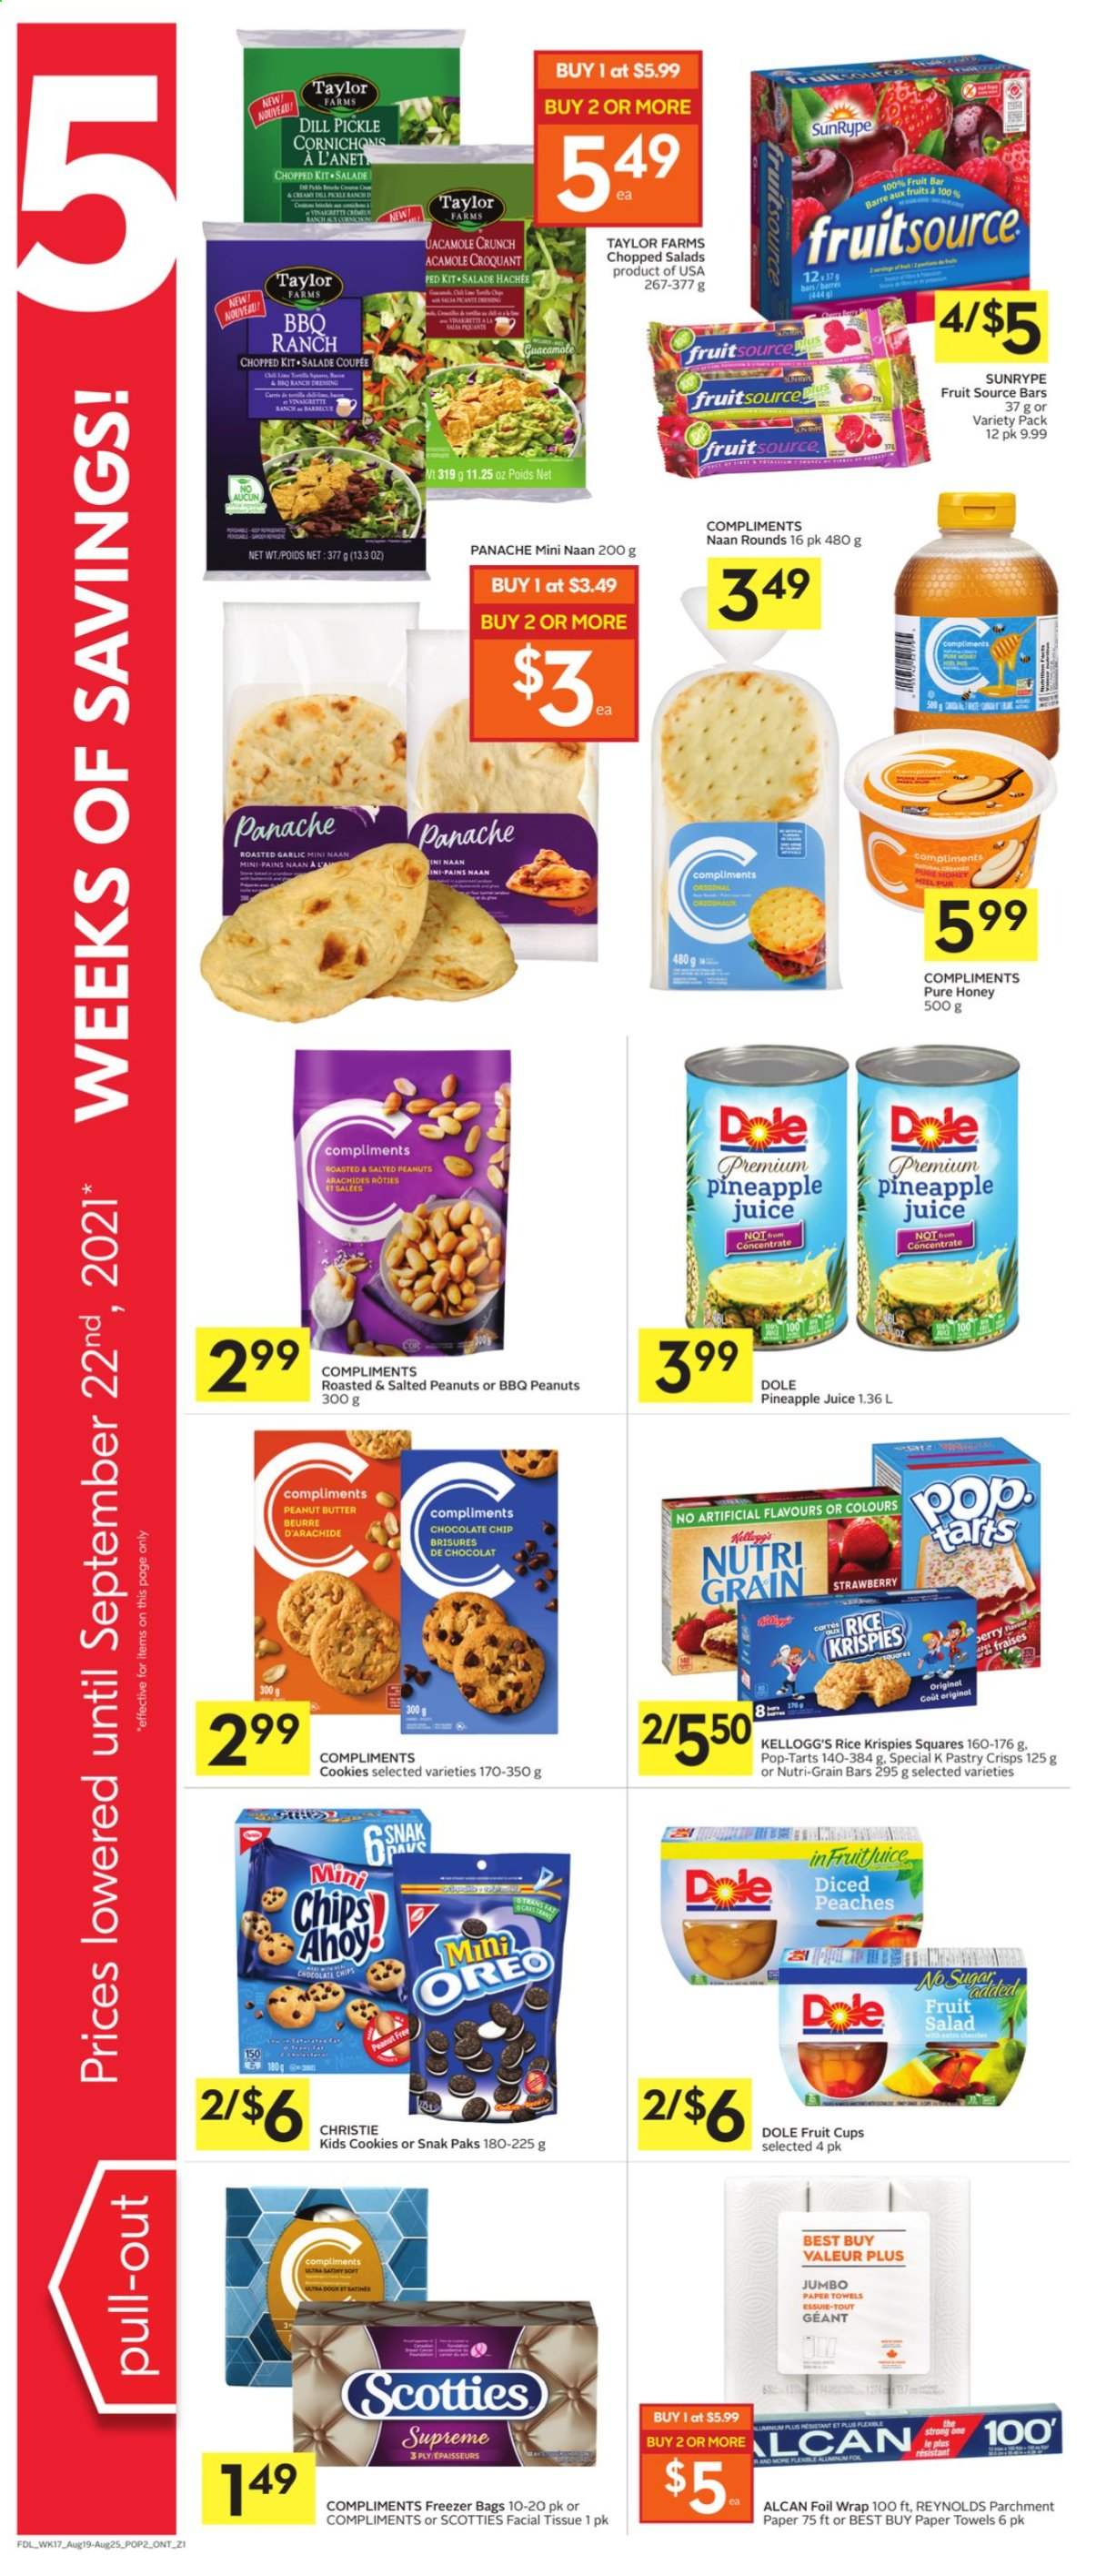 thumbnail - Foodland Flyer - August 19, 2021 - August 25, 2021 - Sales products - salad, Dole, chopped salad, pineapple, fruit cup, ranch dressing, cookies, Kellogg's, Pop-Tarts, dill pickle, fruit salad, Rice Krispies, Nutri-Grain, dill, dressing, honey, peanut butter, peanuts, pineapple juice, juice, Oreo. Page 4.